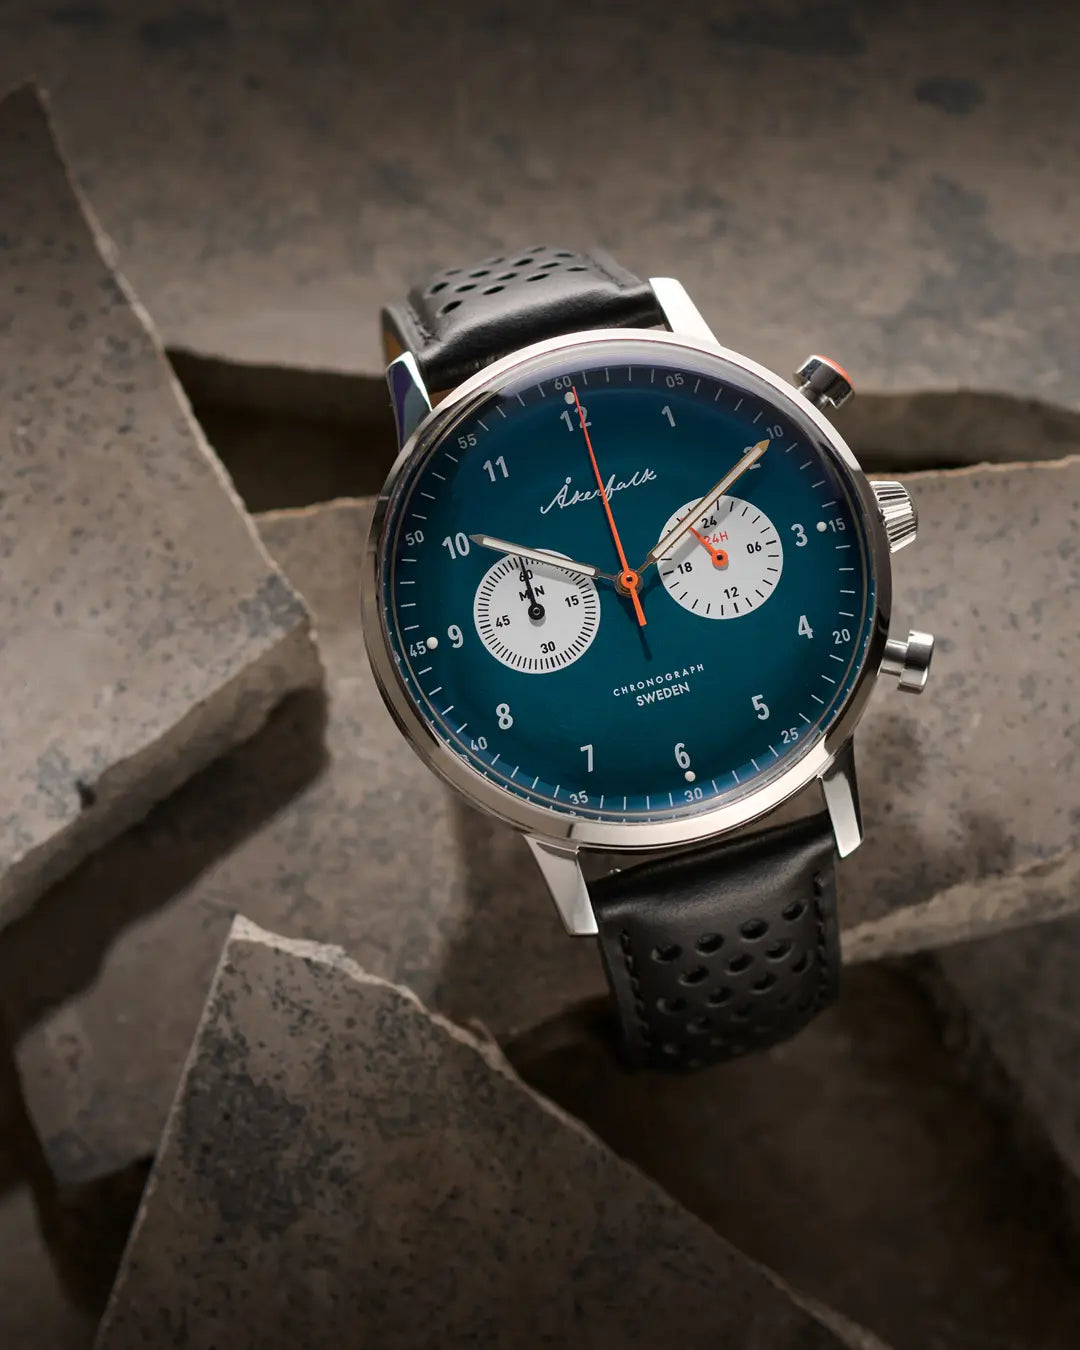 Chronograph watch from Sweden